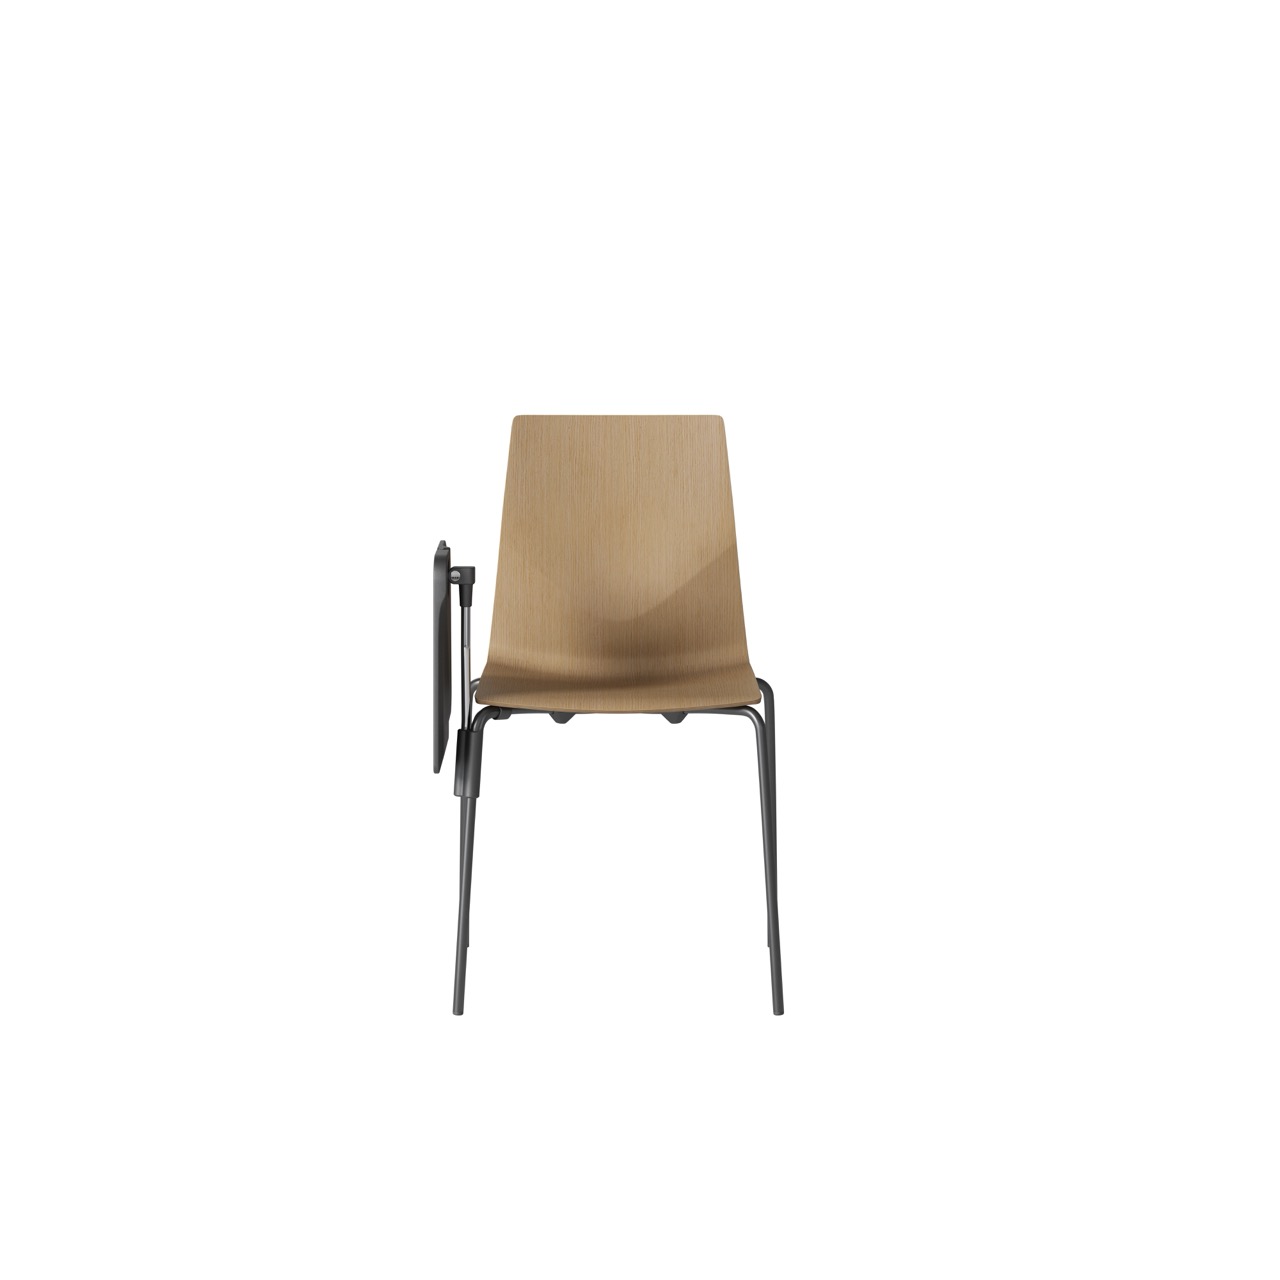 OCEE&FOUR – Chairs – FourCast 2 Four – Veneer shell - Inno Note - Nested - Packshot Image 7 Large